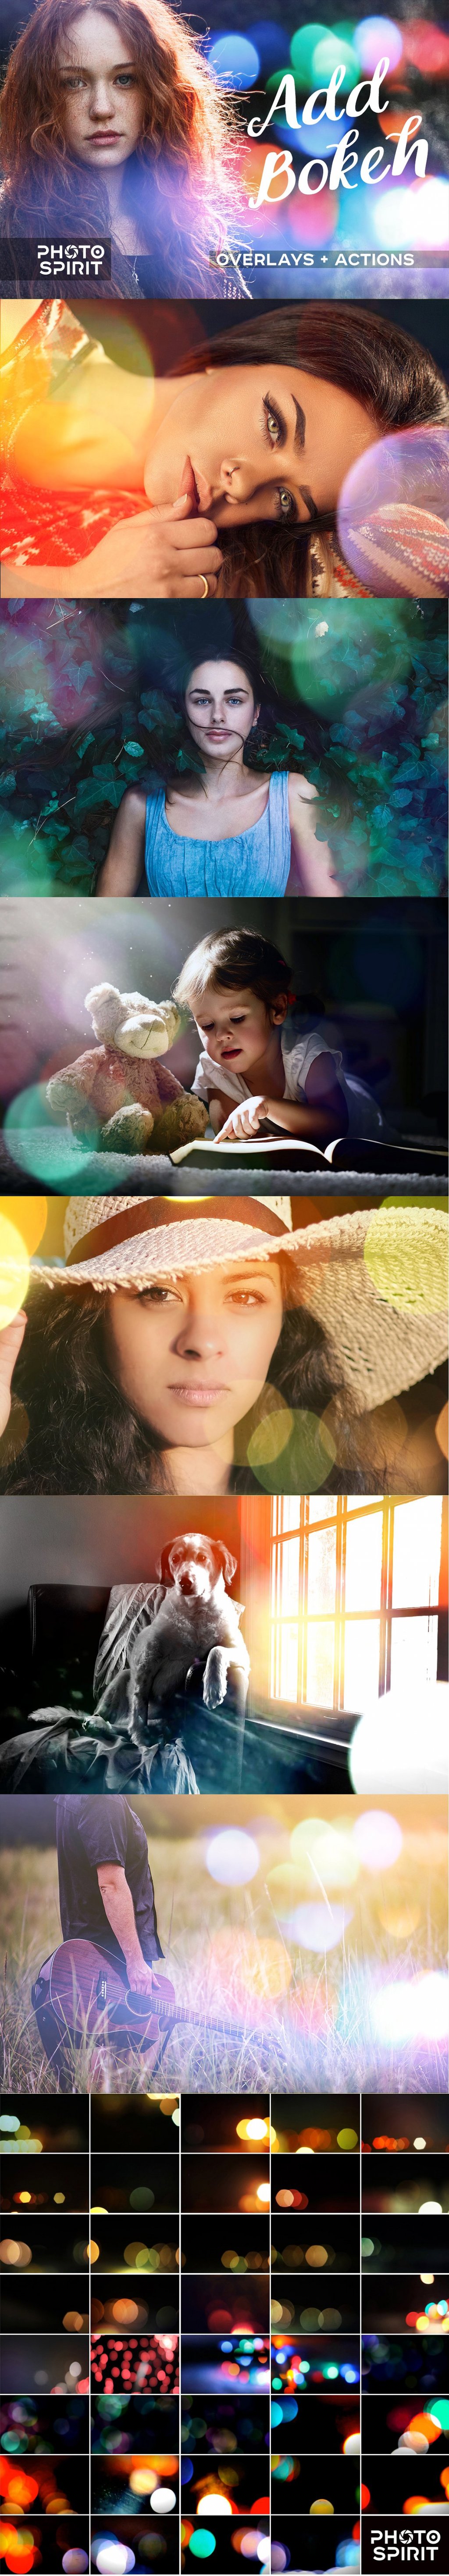 Bokeh Overlays And Actions